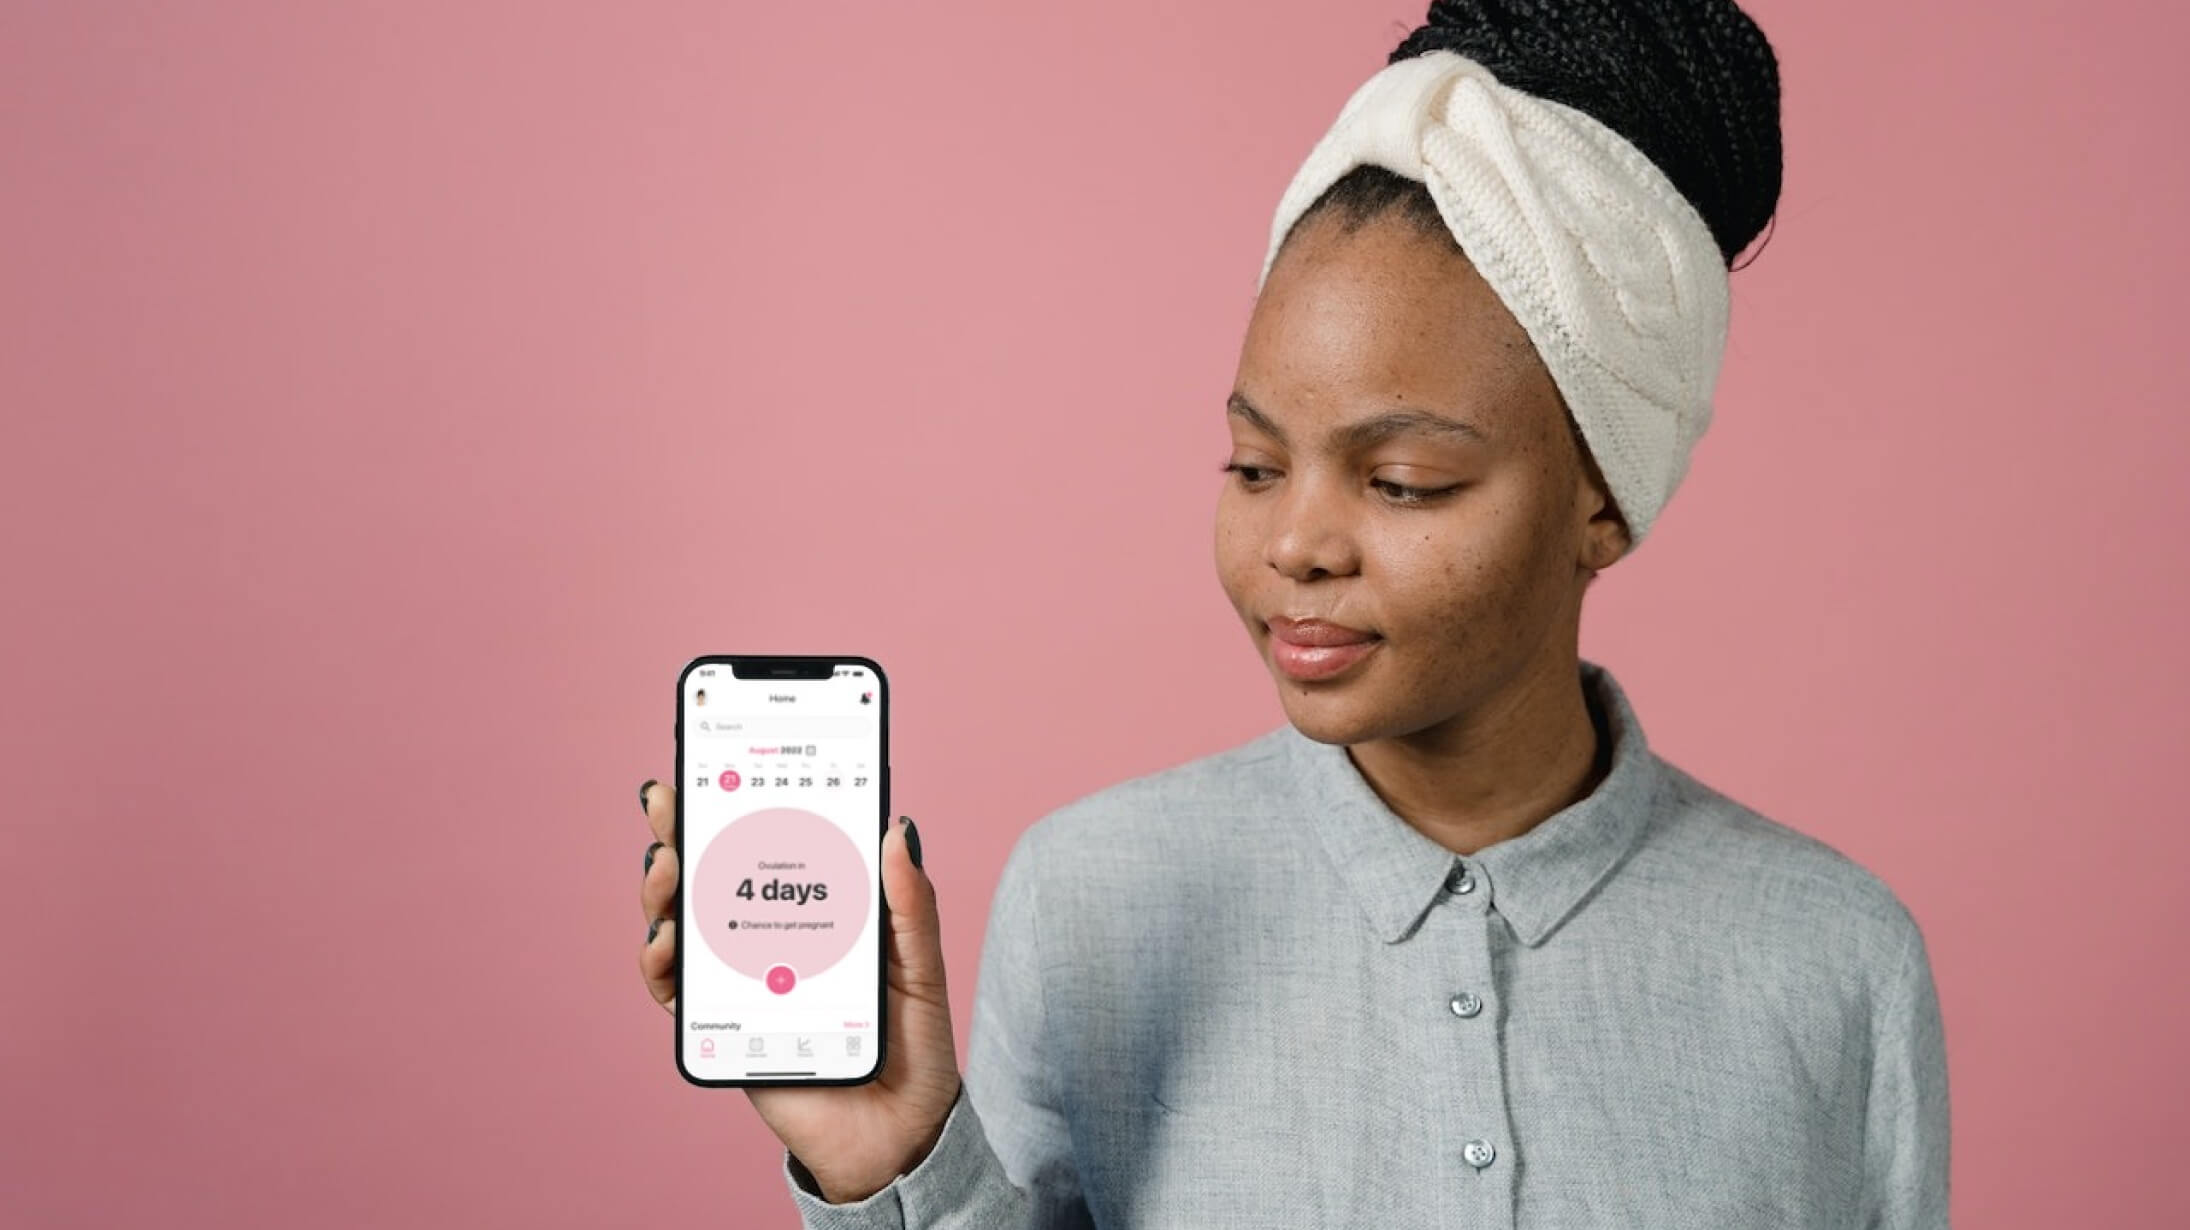 pieoneers-womens-health-prototype-fertility-tracking-app-lady-with-phone